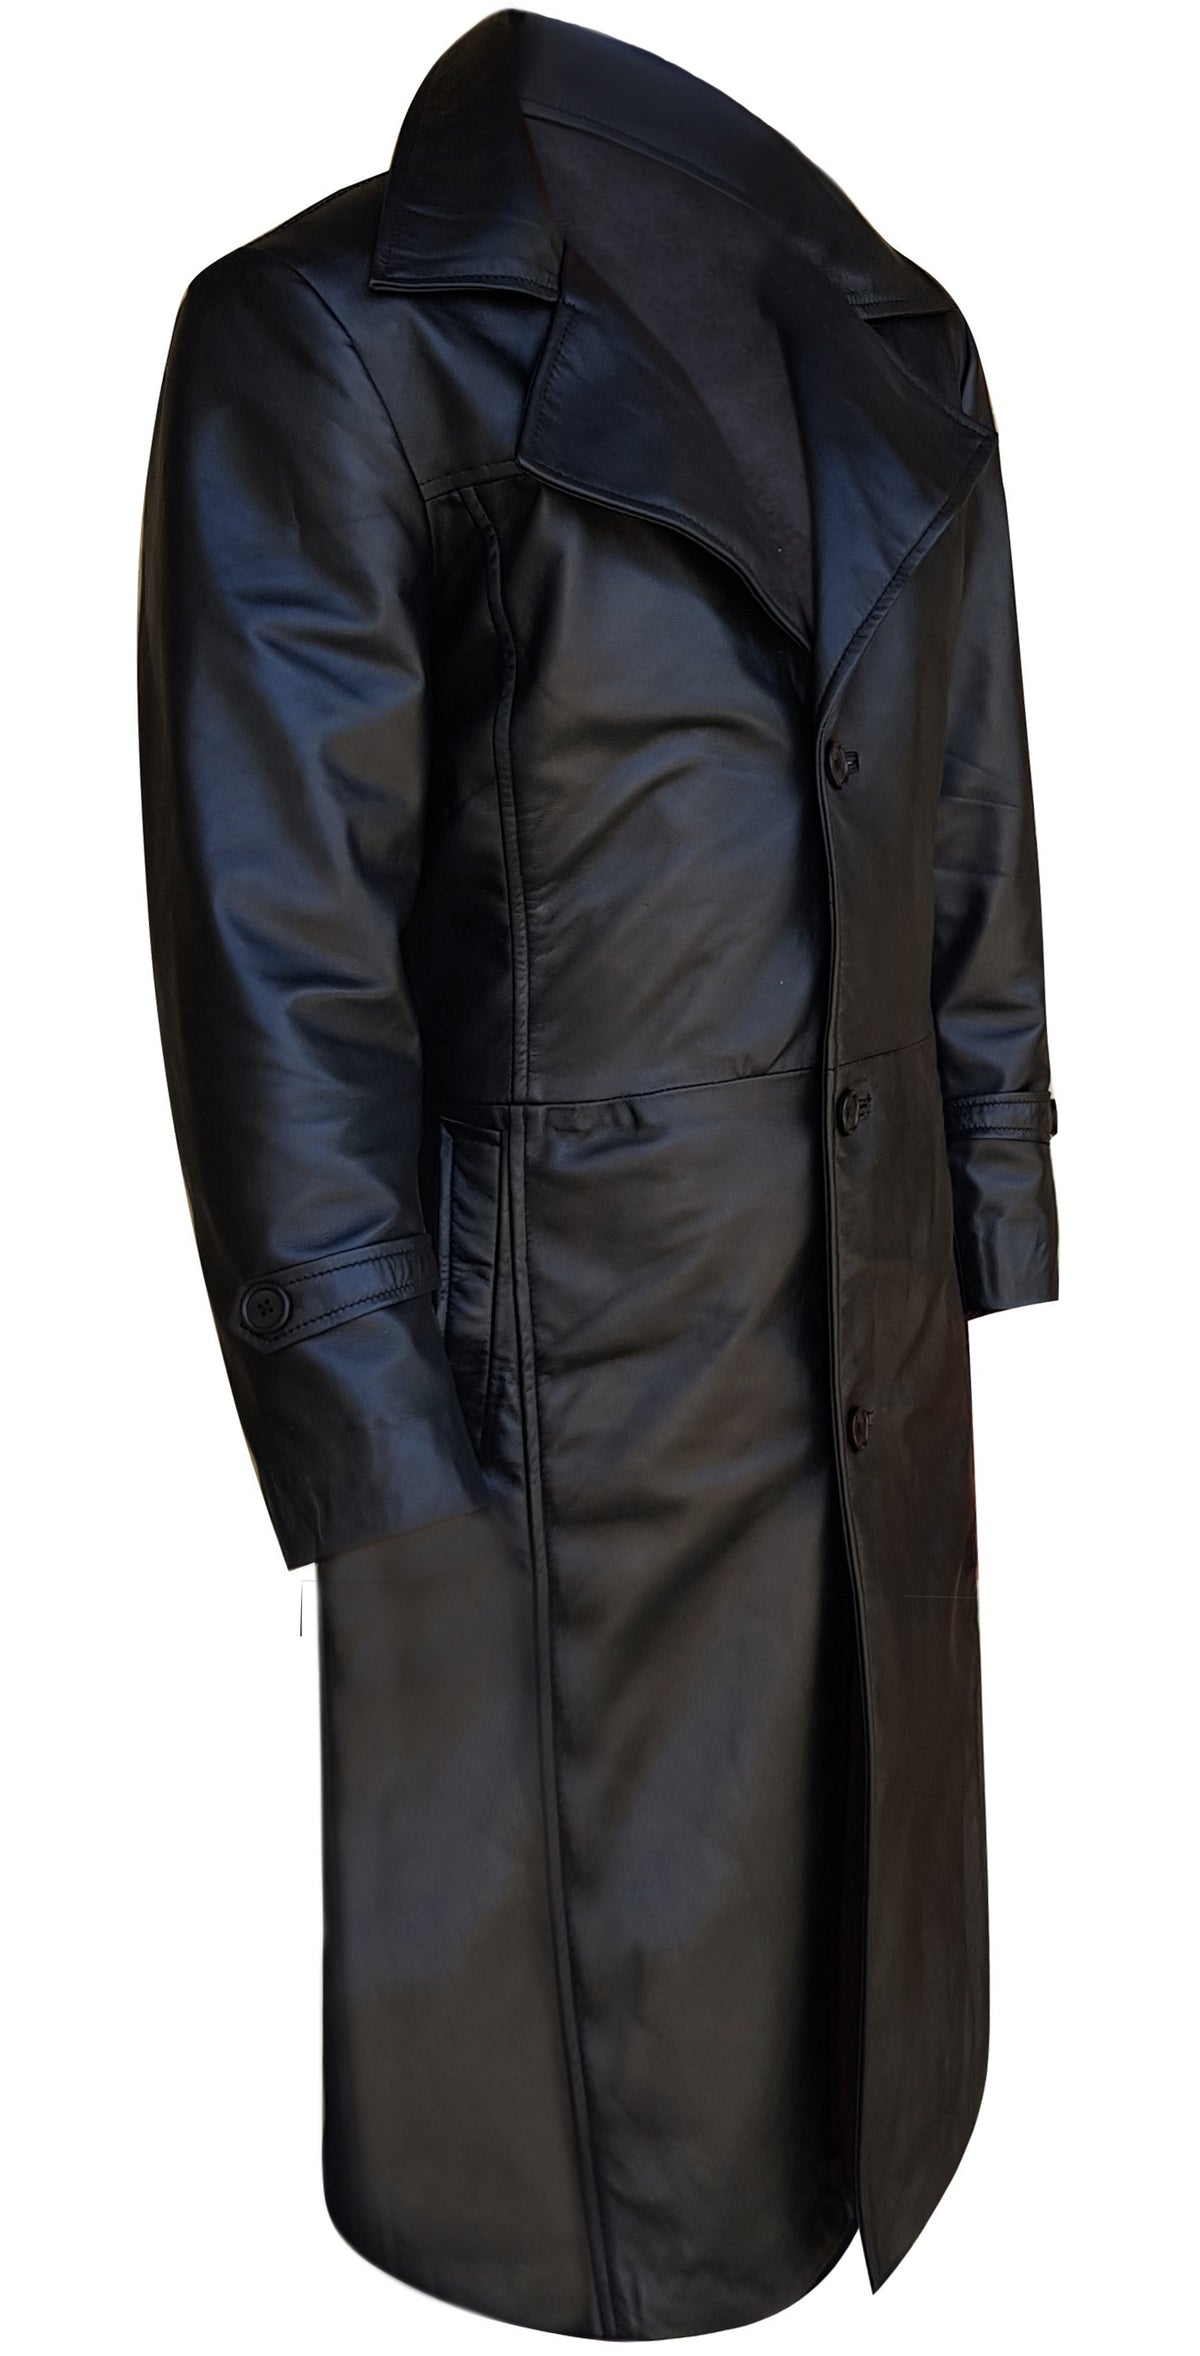 Black Leather Duster Trench Coat For Men - Ultimate Leather Jackets